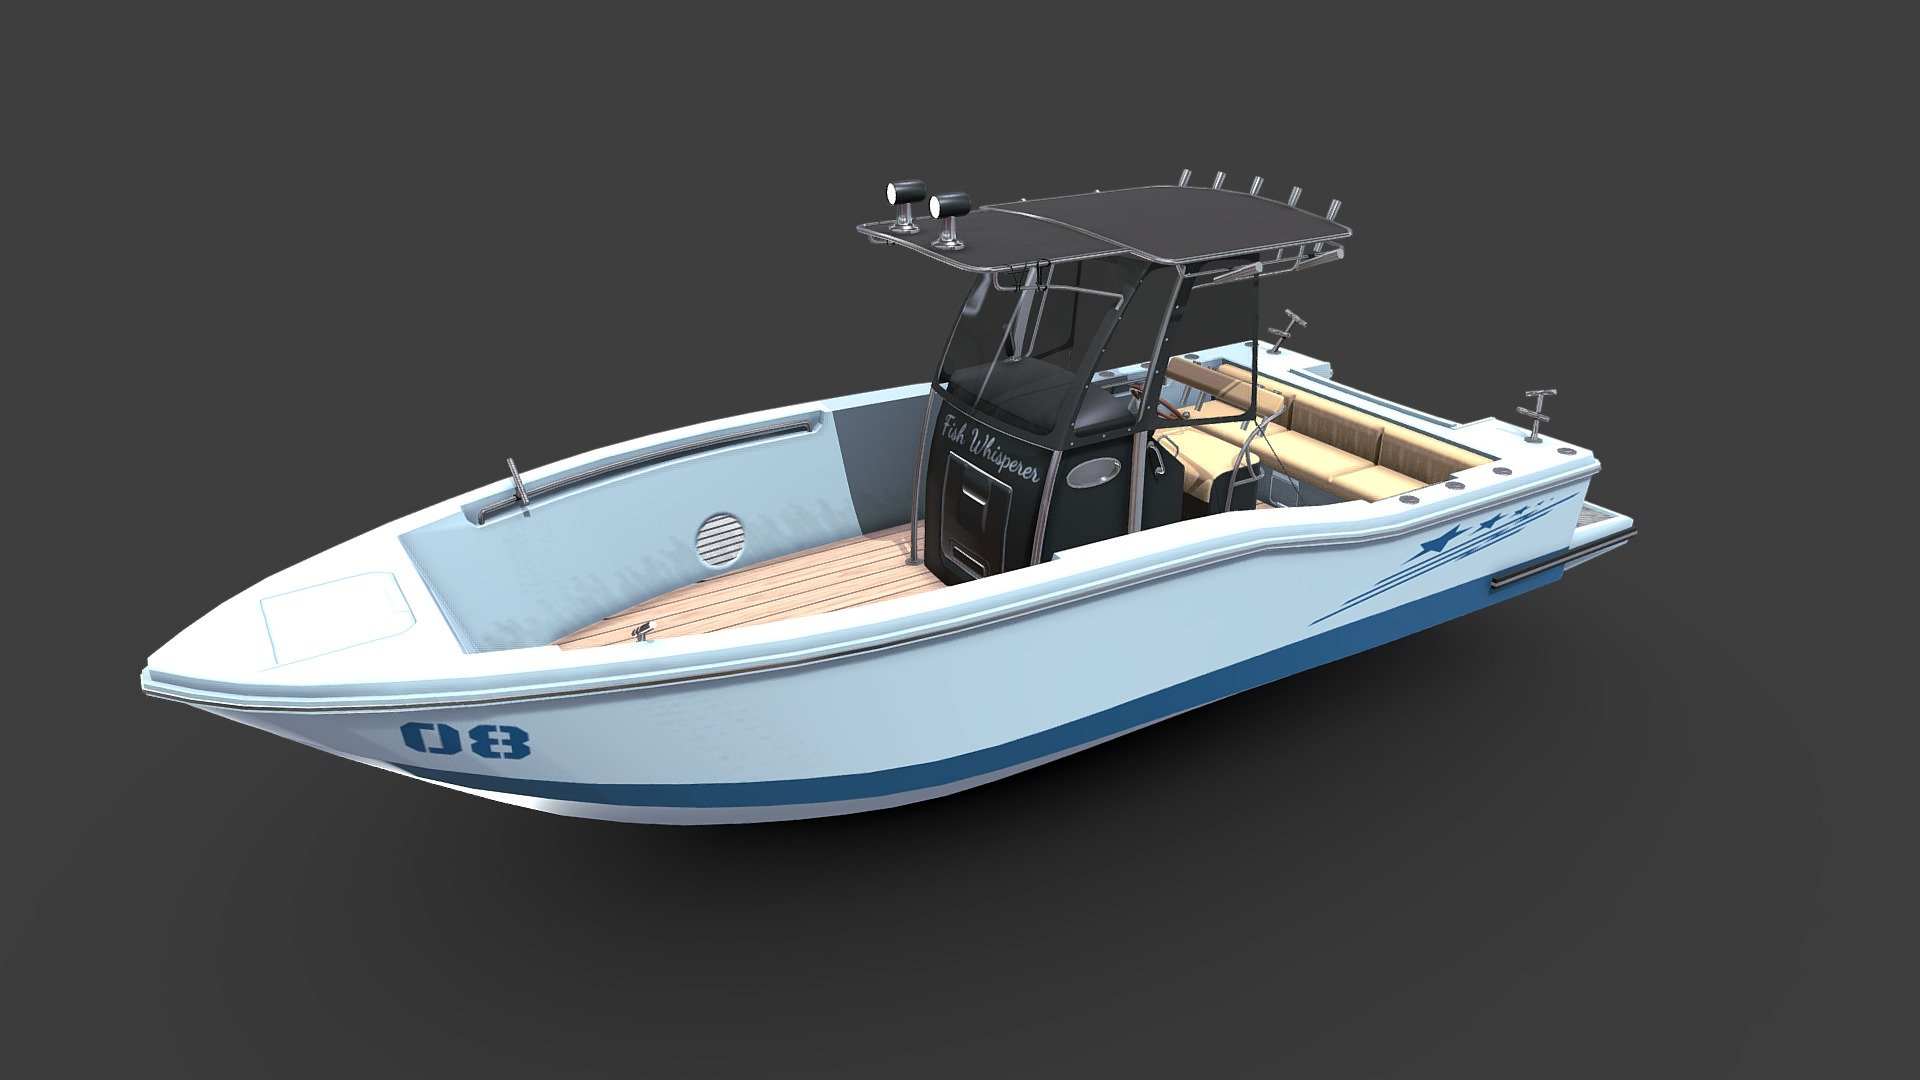 Fishing Boat




-Low-poly ready to use in Games, AR/VR (10,999 Tris)

-Textures are in PNG format 4096x4096 PBR metalness 1 set.

-Files unit: Centimeters

-Available formats: MAX 2018 and 2015, OBJ, MTL, FBX, .tbscene.

-If you need any other file format you can always request it.

-All formats include materials and textures.
 - Fishing Boat - Buy Royalty Free 3D model by MaX3Dd 3d model